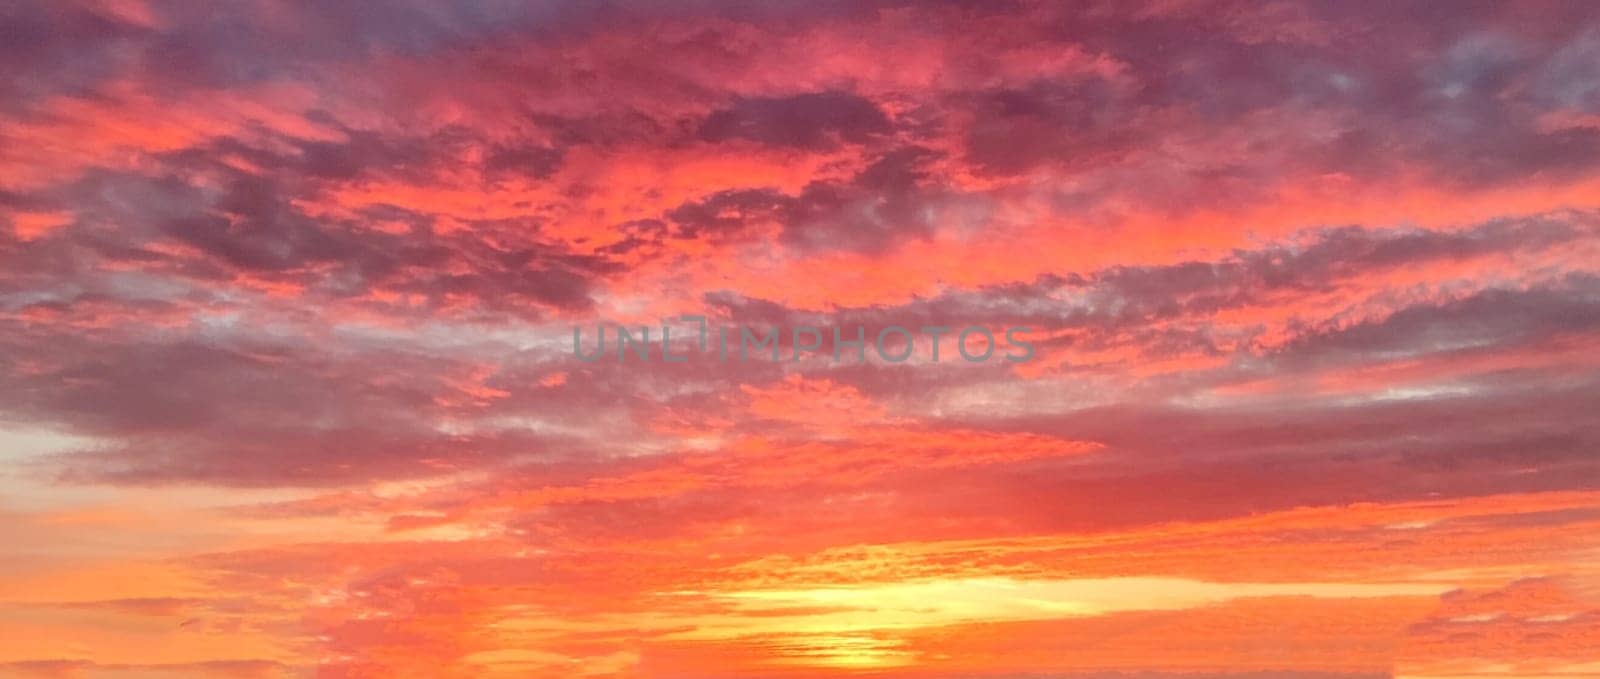 setting sun on a lilac orange cloudy sky for a dramatic sky background by Annado